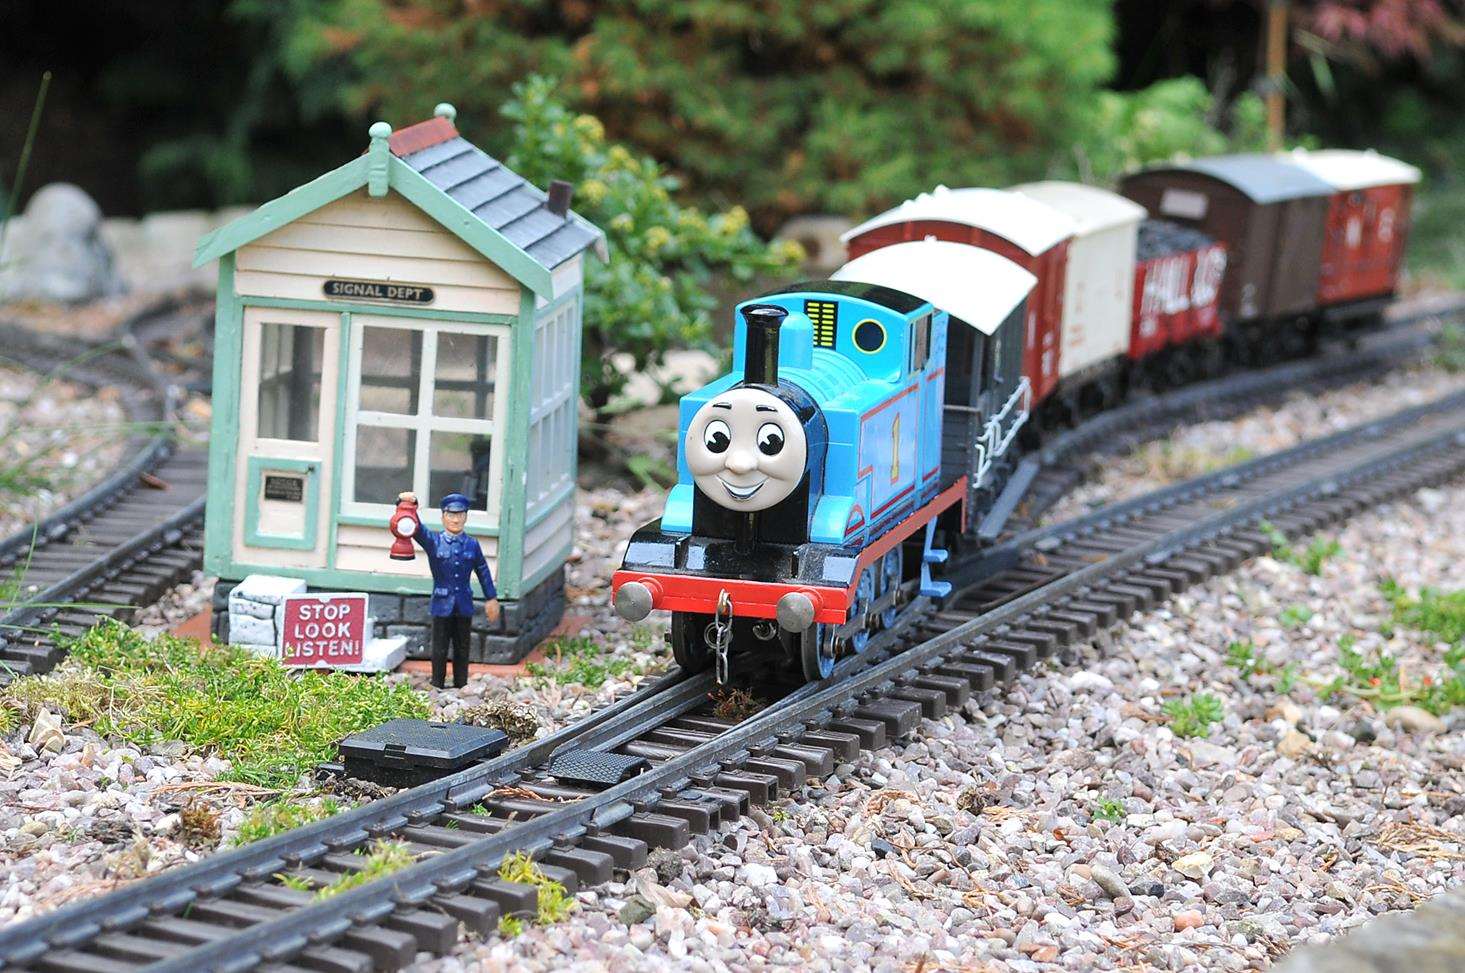 Thomas the Tank Engine is coming to Kent